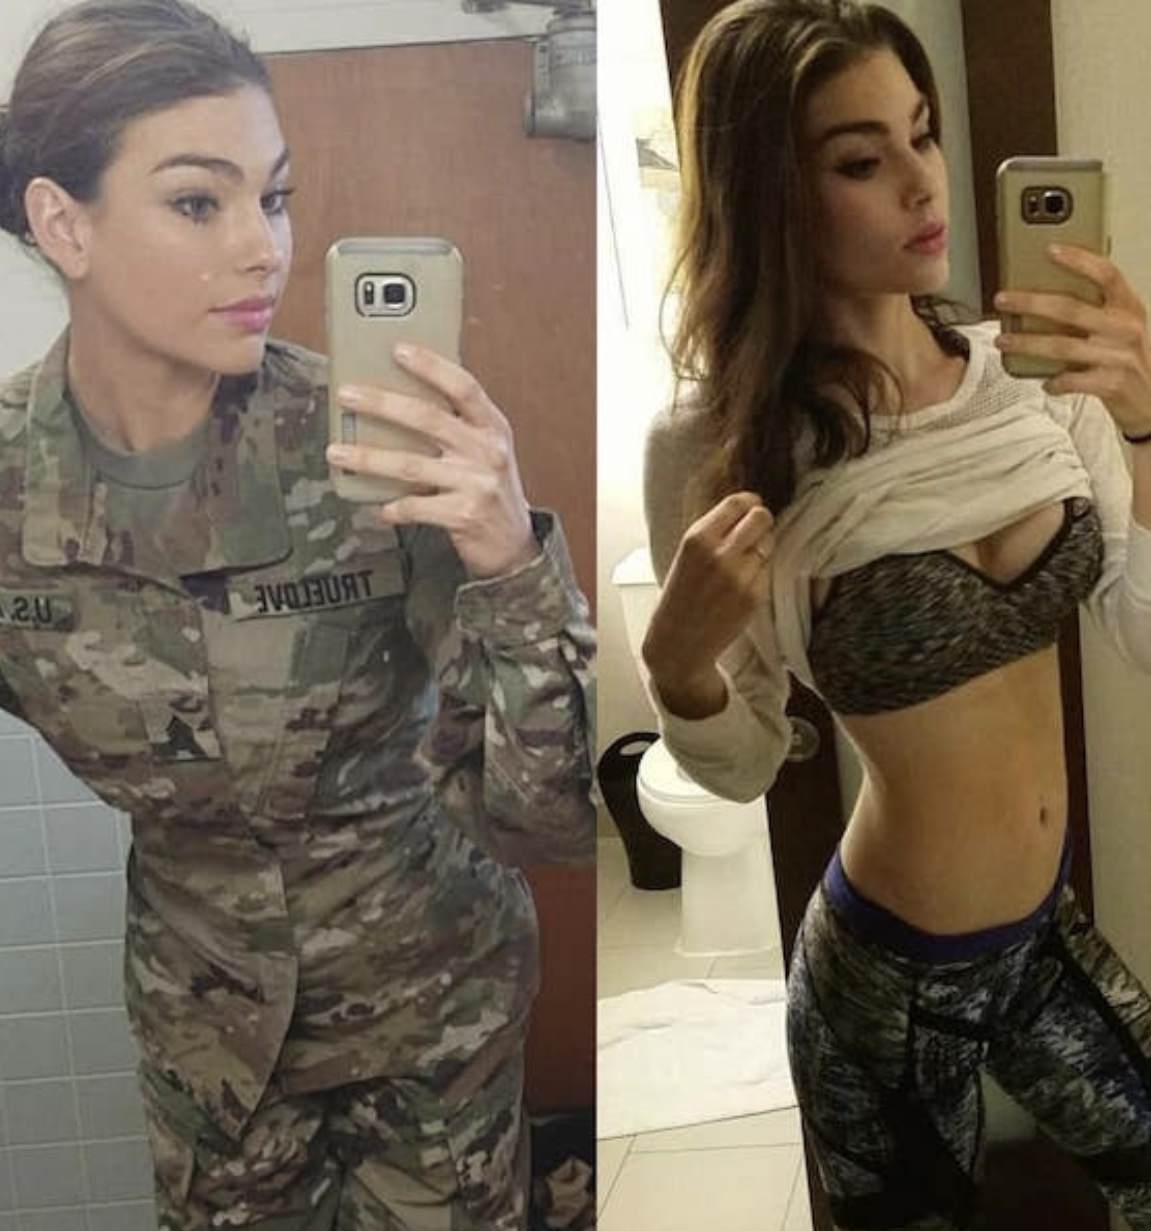 Super sexy Army woman woman taking selfie, and another picture of her lifting her shirt to show her breasts in a bra